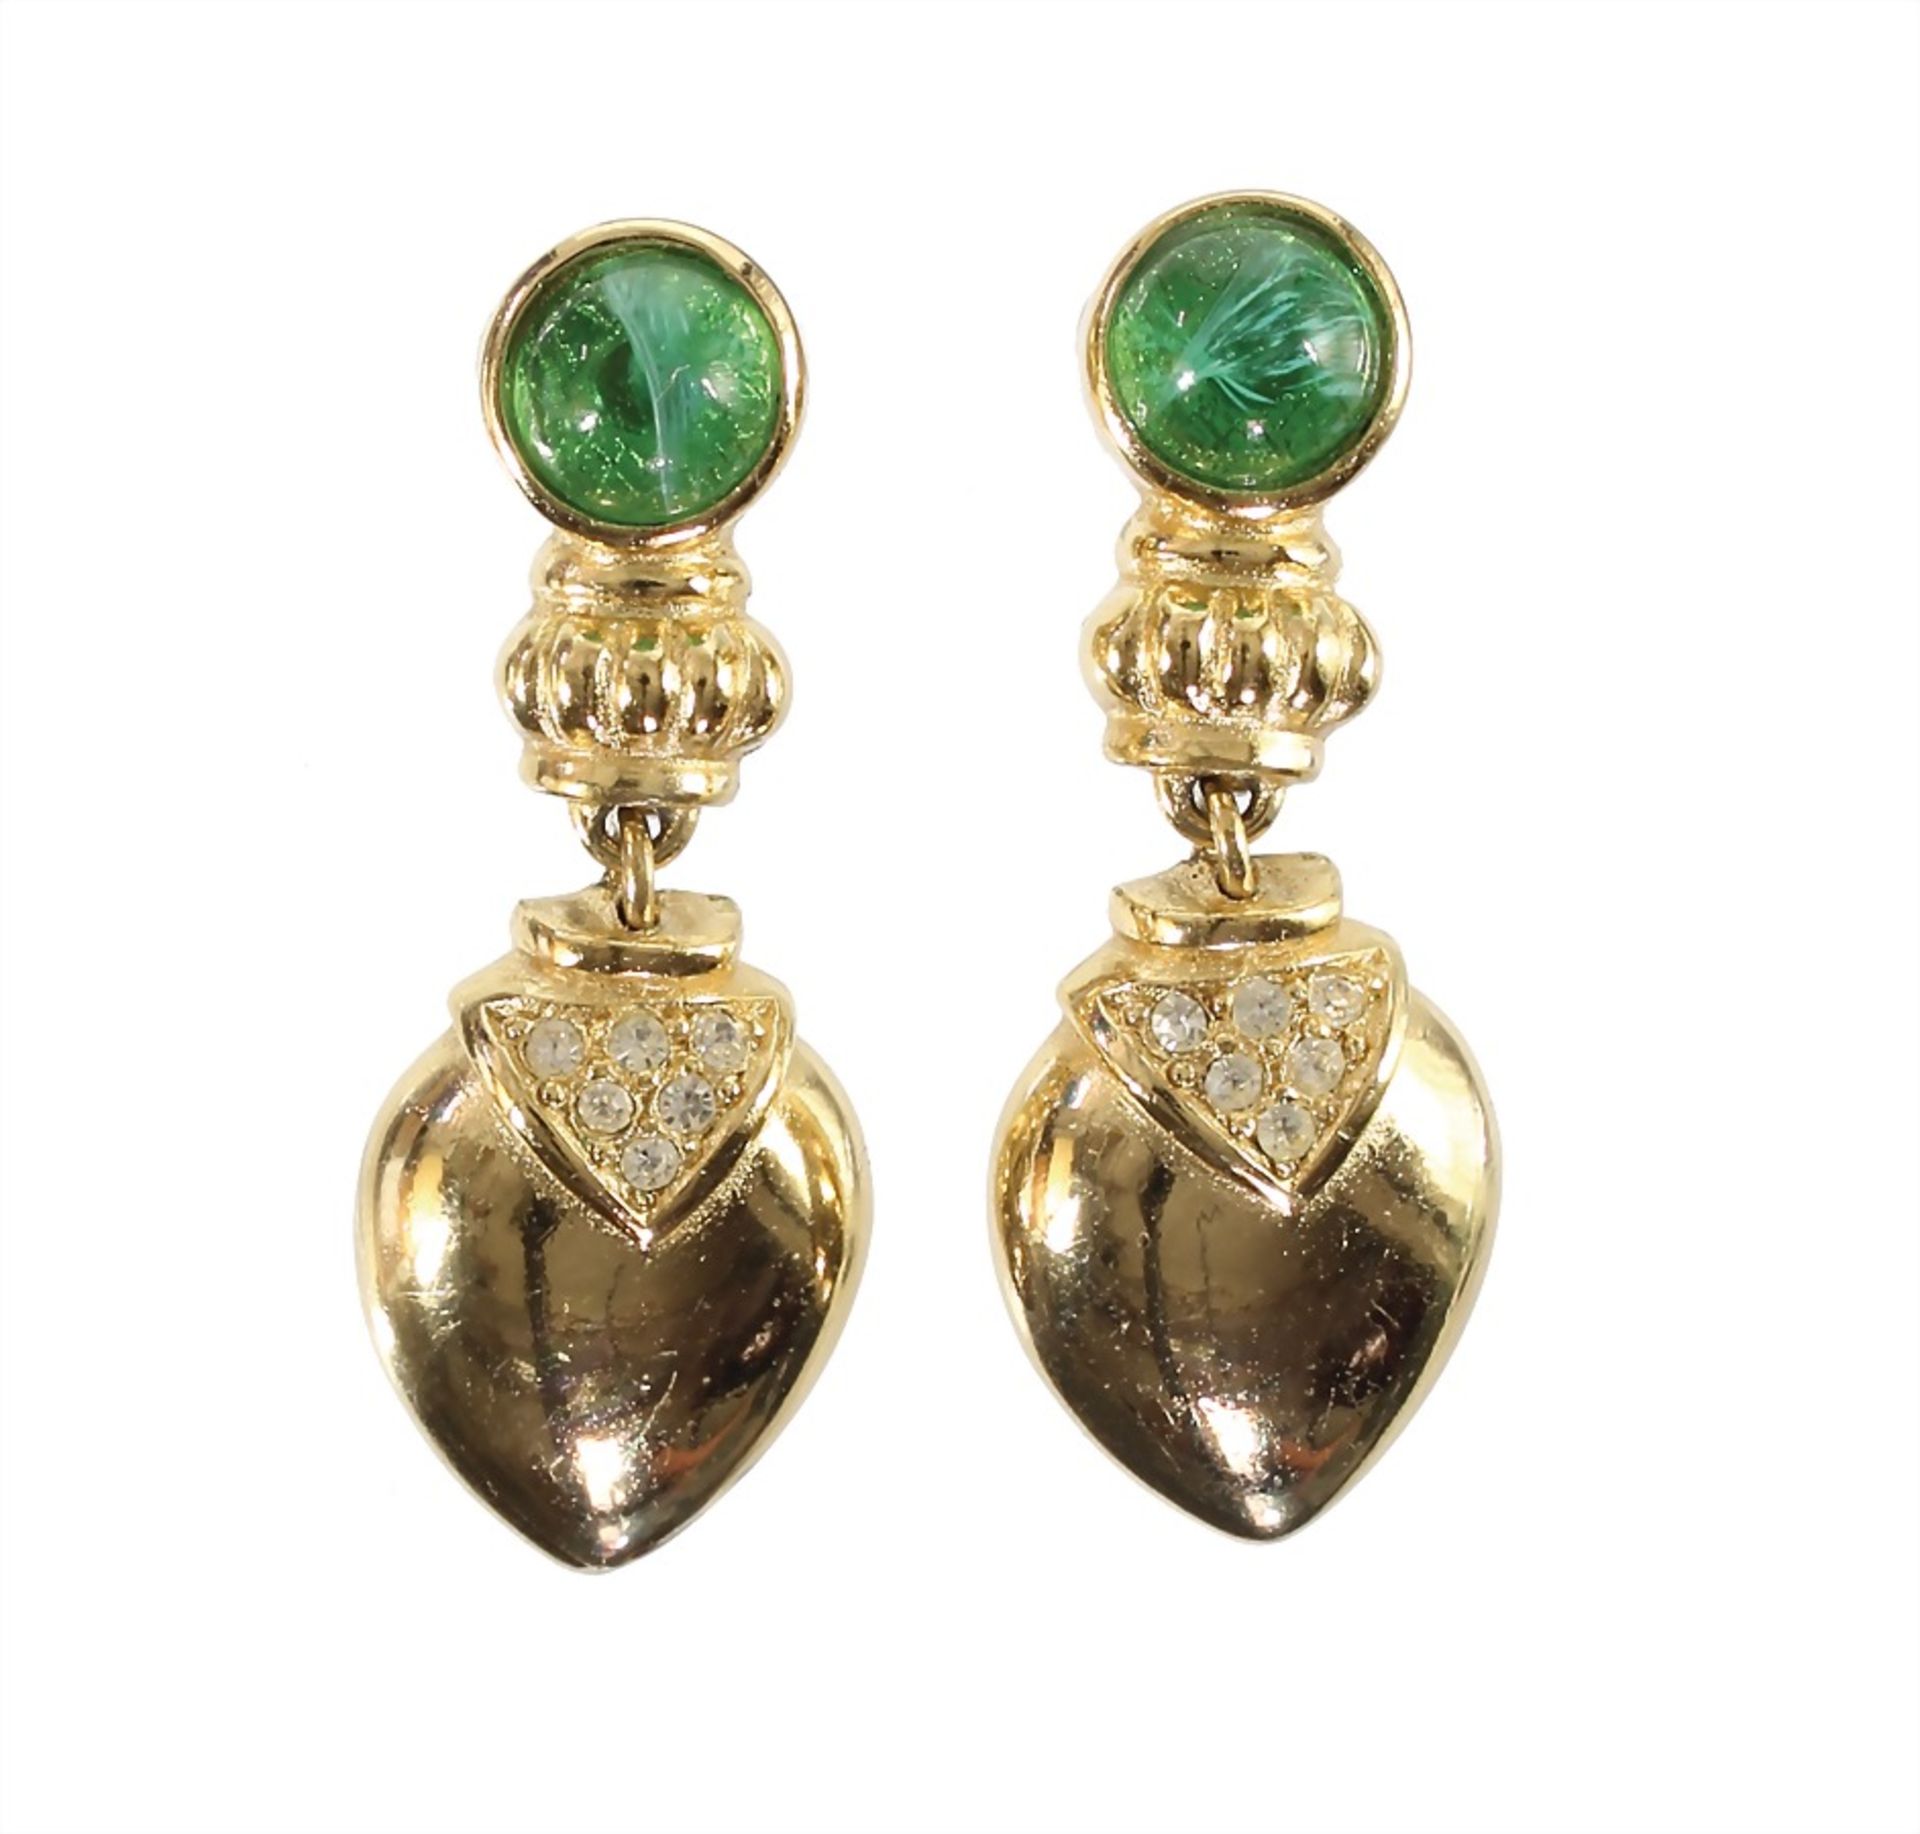 ear clips, "C. DIOR", metal gilded signed Chr. Dior GERMANY, green glass stone, hanging drop, with